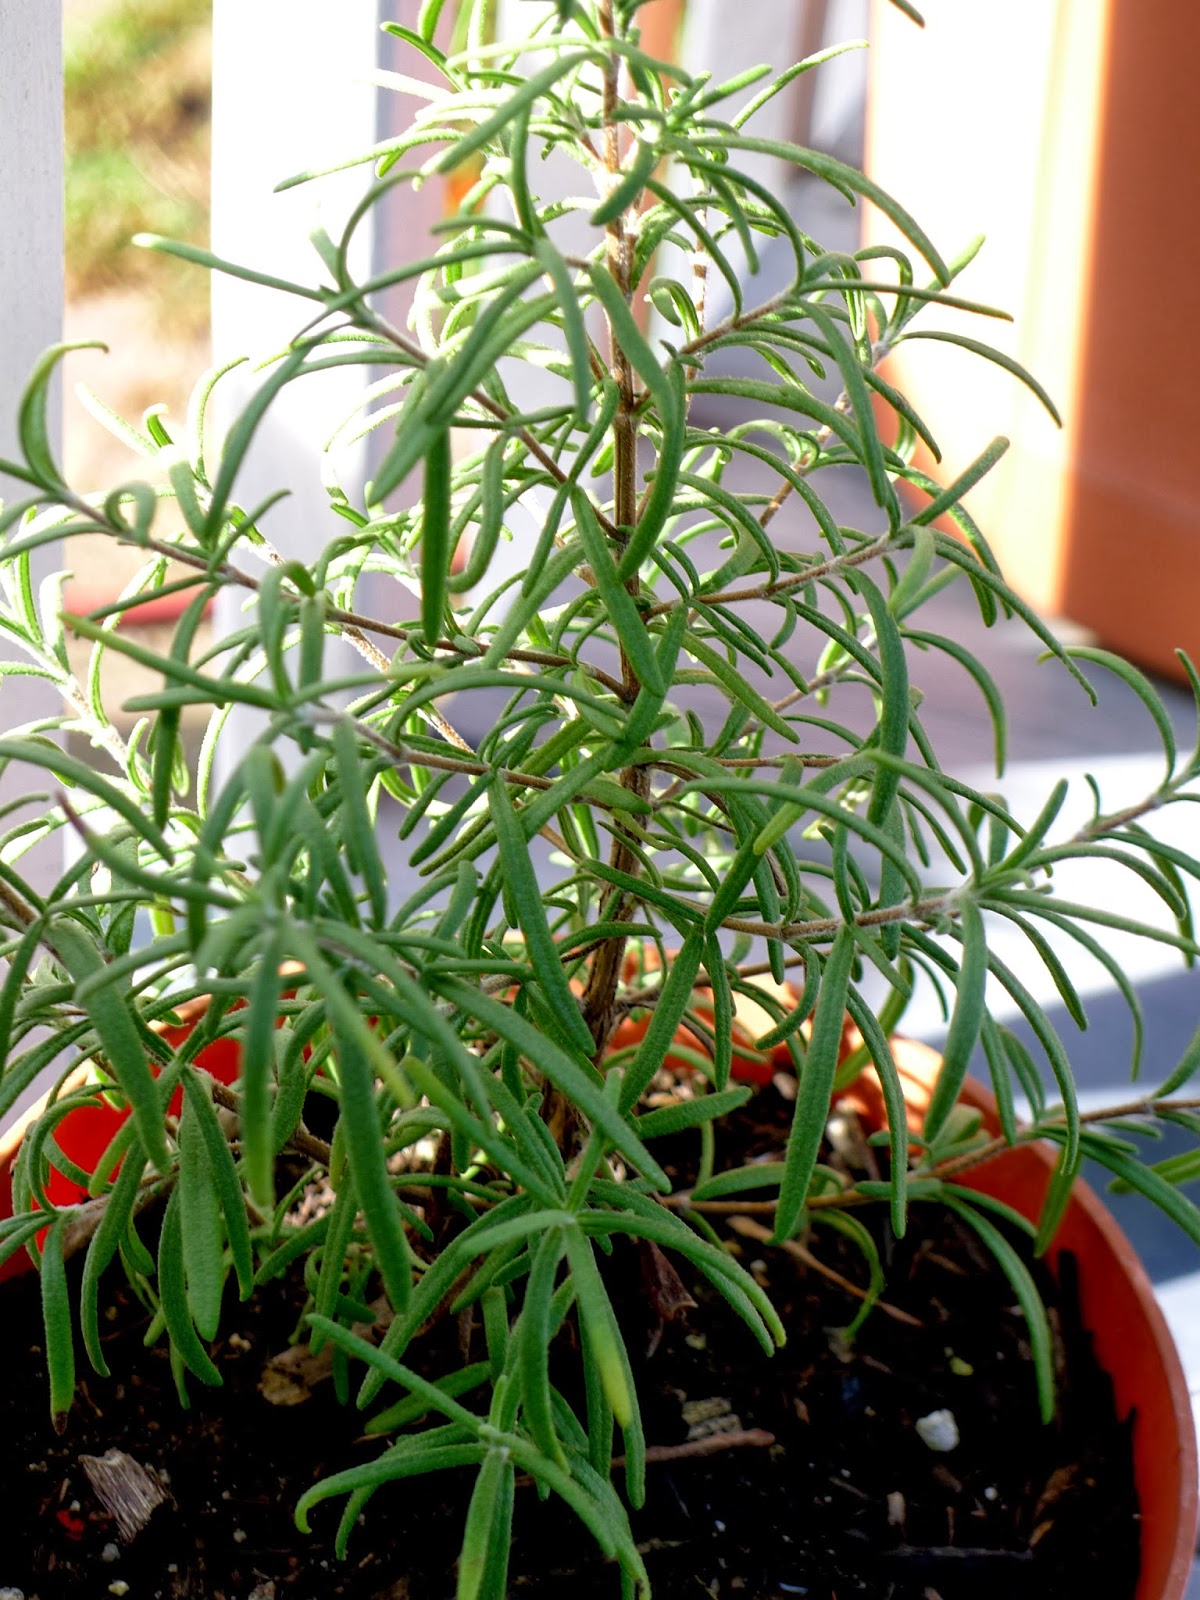 Growing rosemary in a container, urban farming